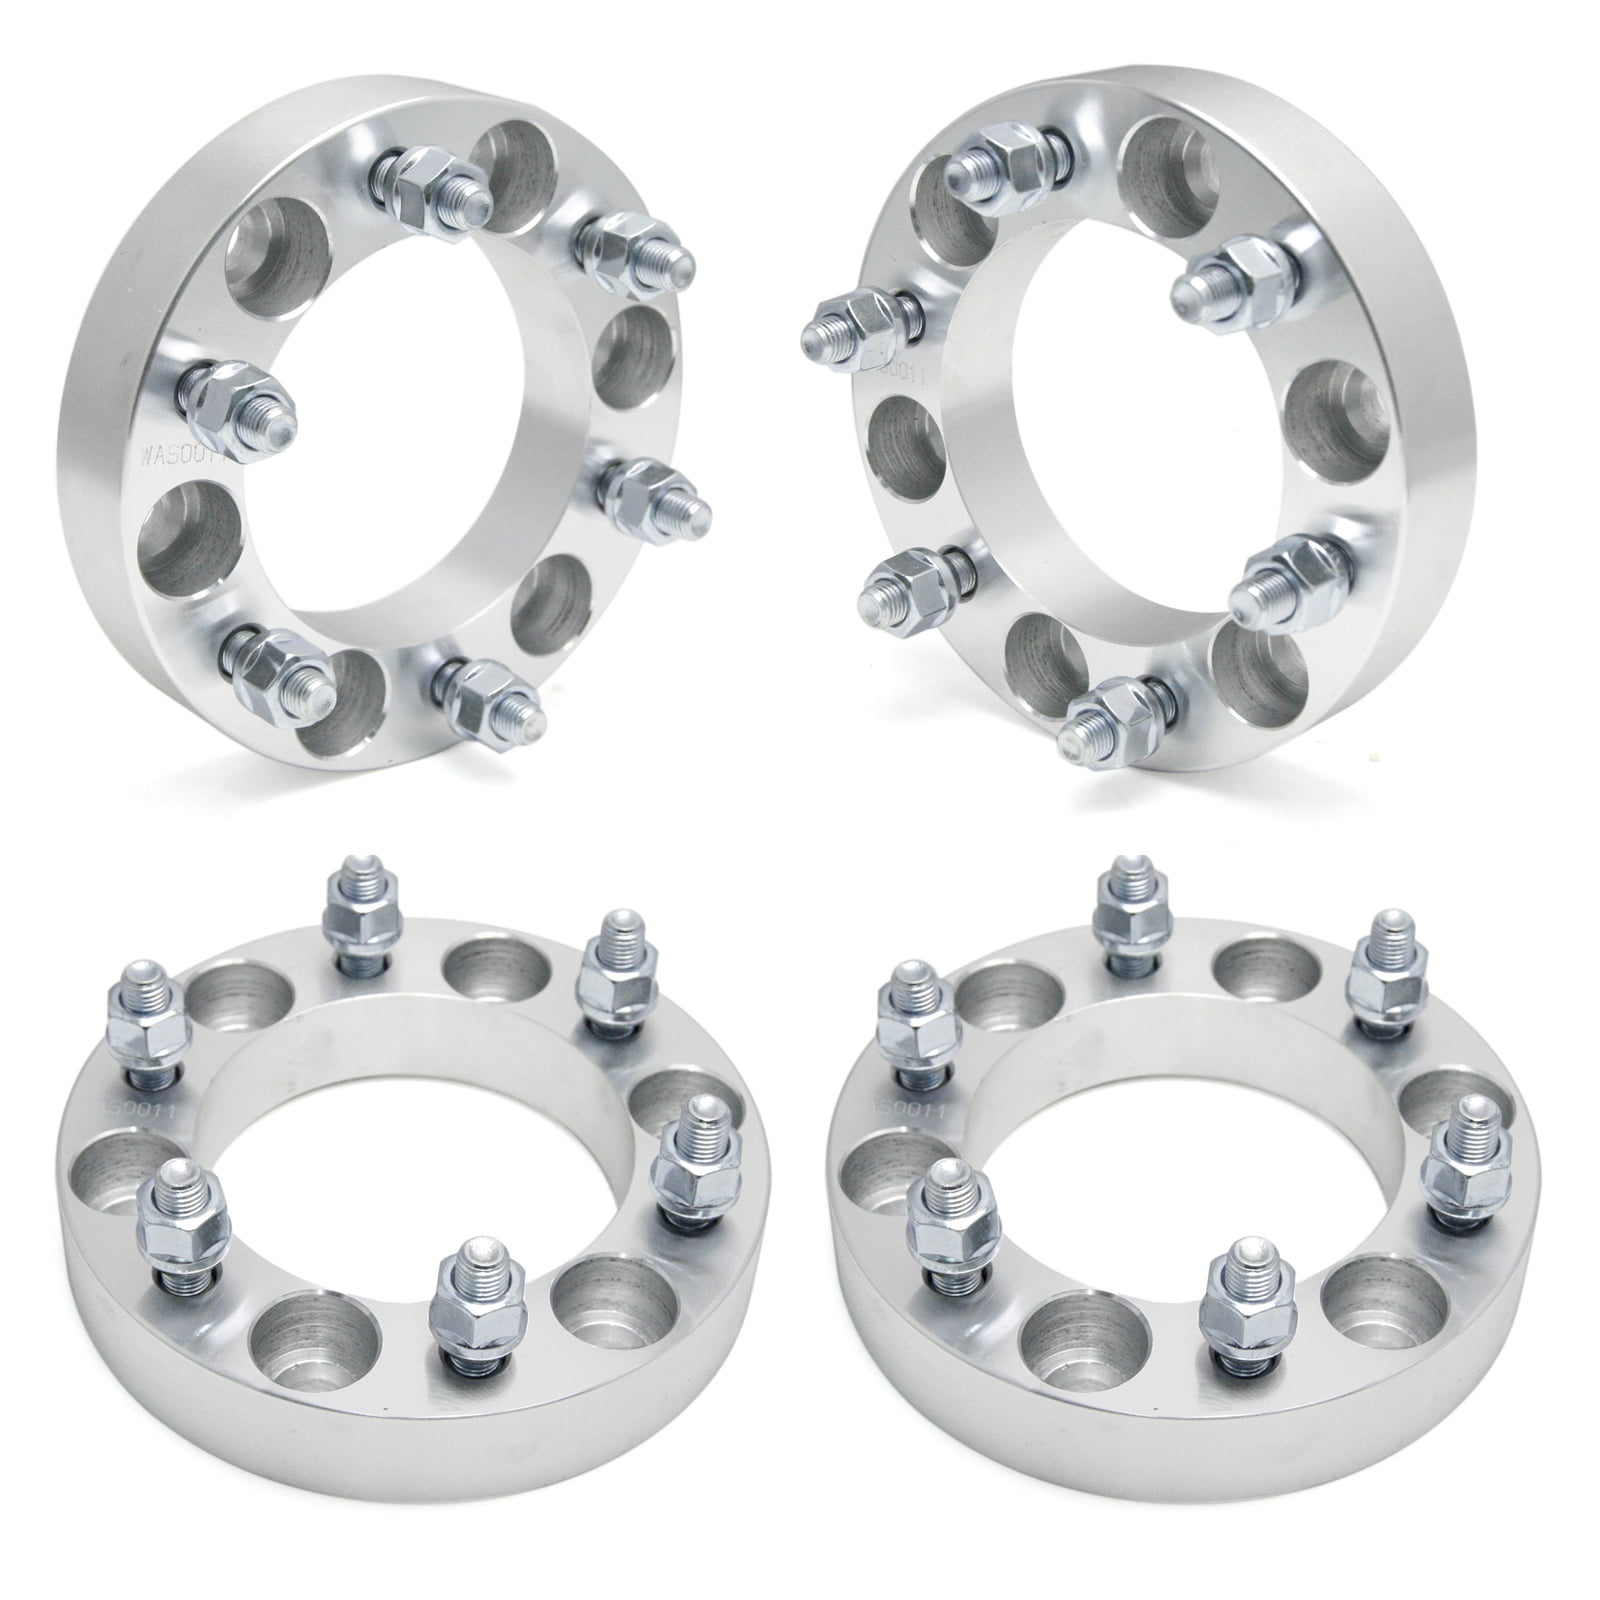 108mm bore, 12x1.5 Studs & Nuts Toyota 4Runner GMC Canyon Toyota Tundra 6 Lug wheelspacer compatible for Chevrolet Colorado 1 inch 6x5.5 Wheel Spacers 25mm 4 pieces Silver Toyota Tacoma 